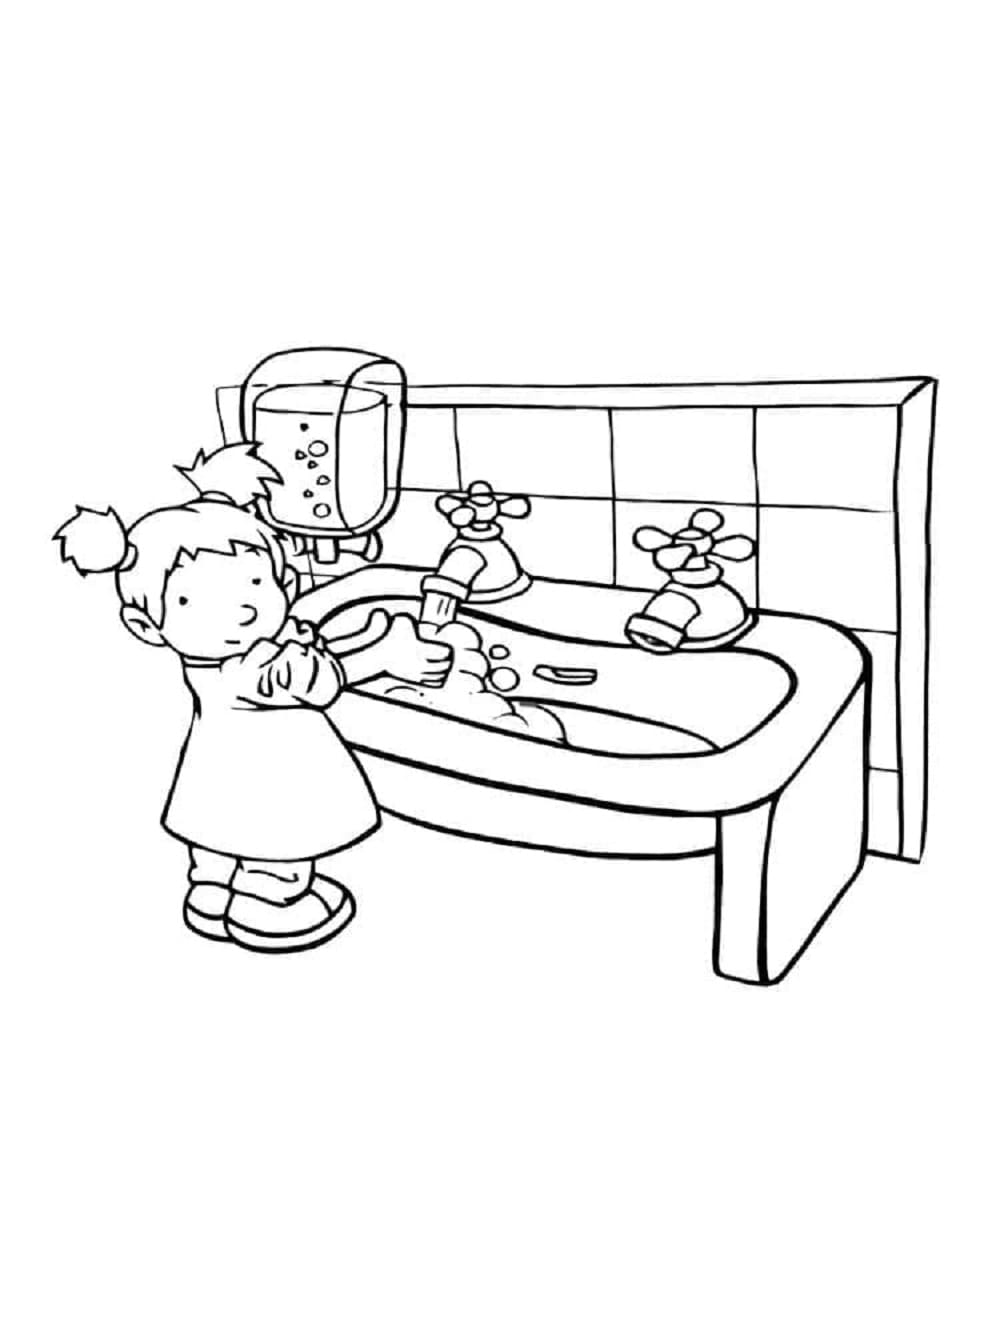 Printable Little Girl Practice Hygiene Coloring Page